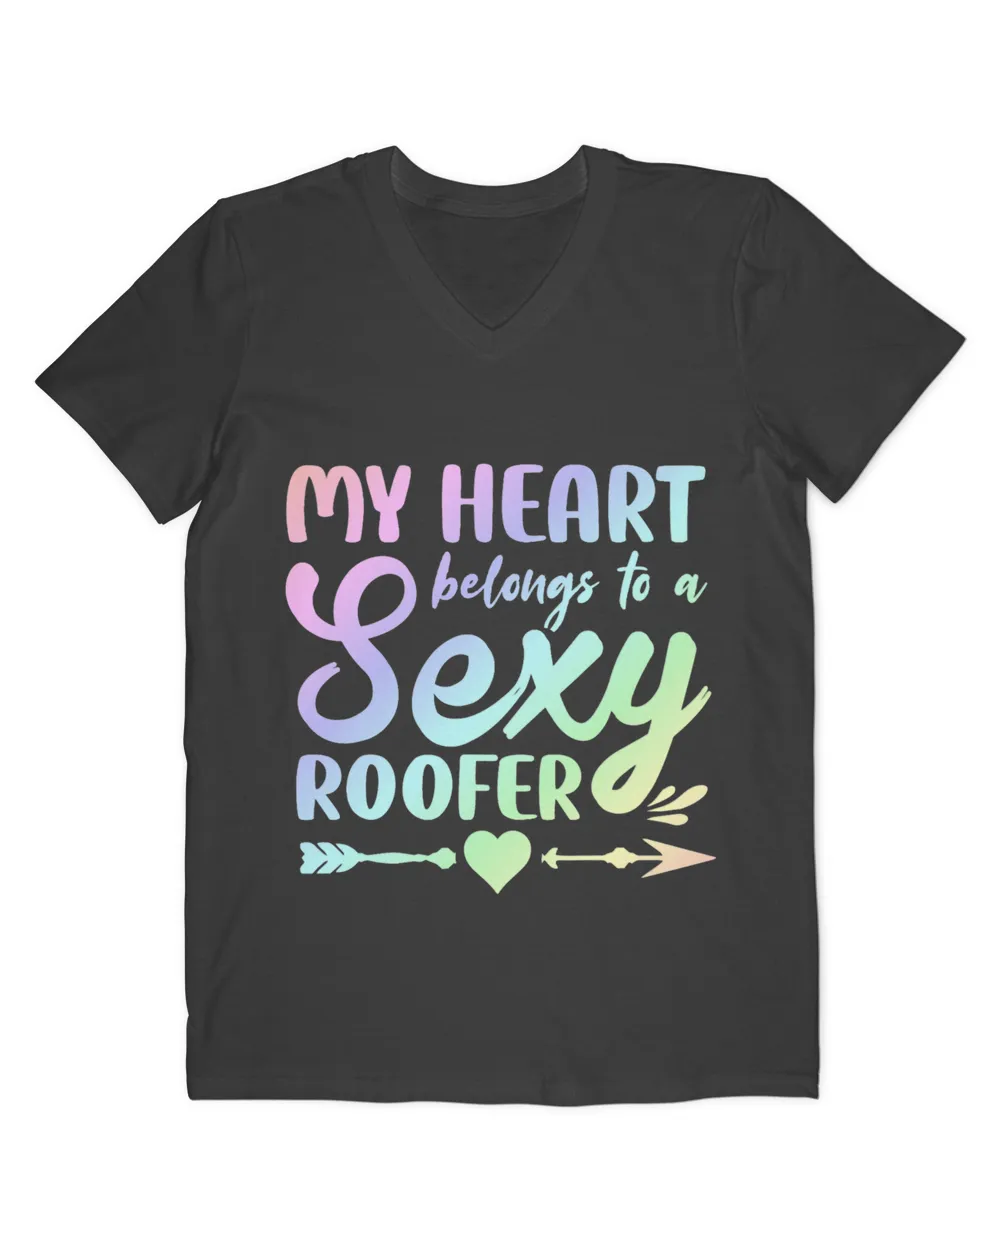 My Heart Belongs To A Sexy Roofer 2Wife Roofing 21